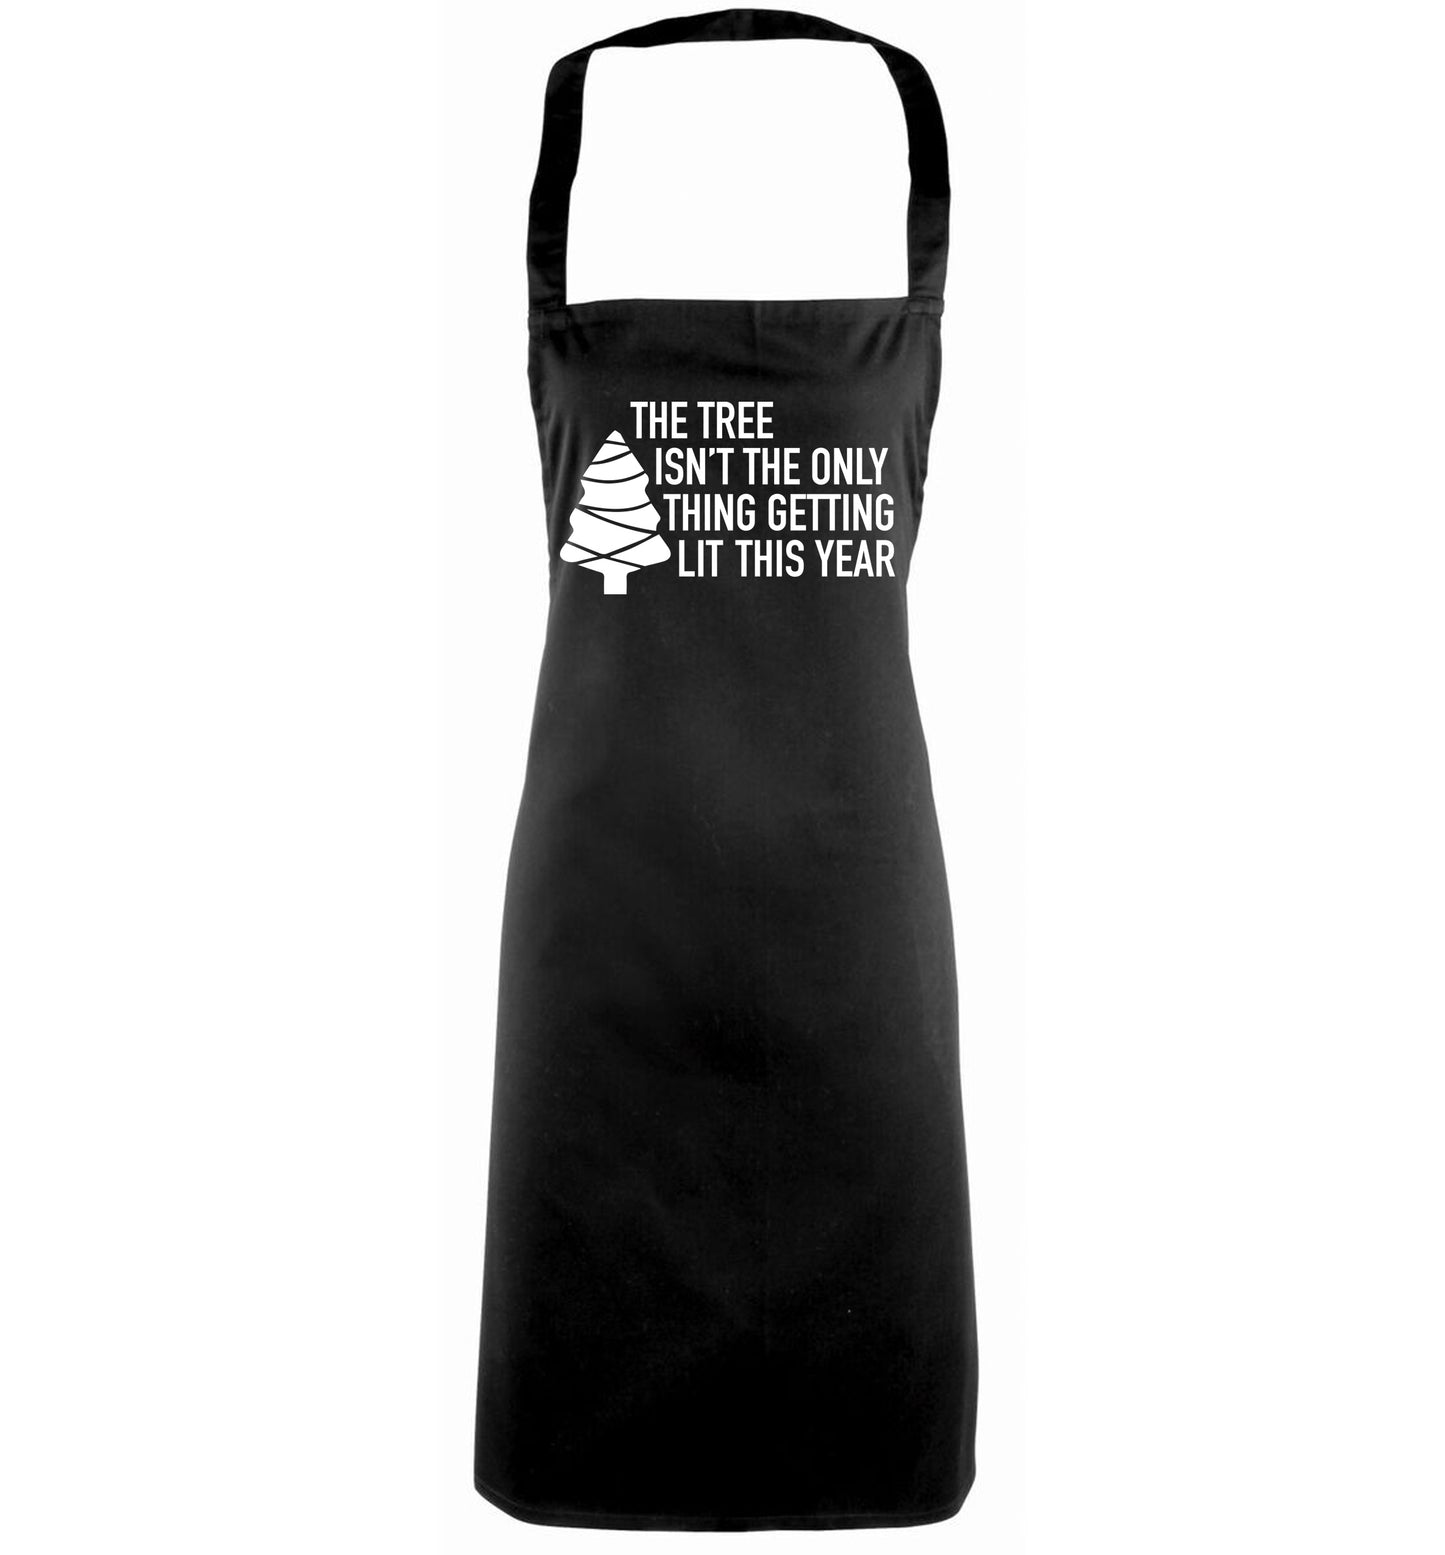 The tree isn't the only thing getting lit this year black apron